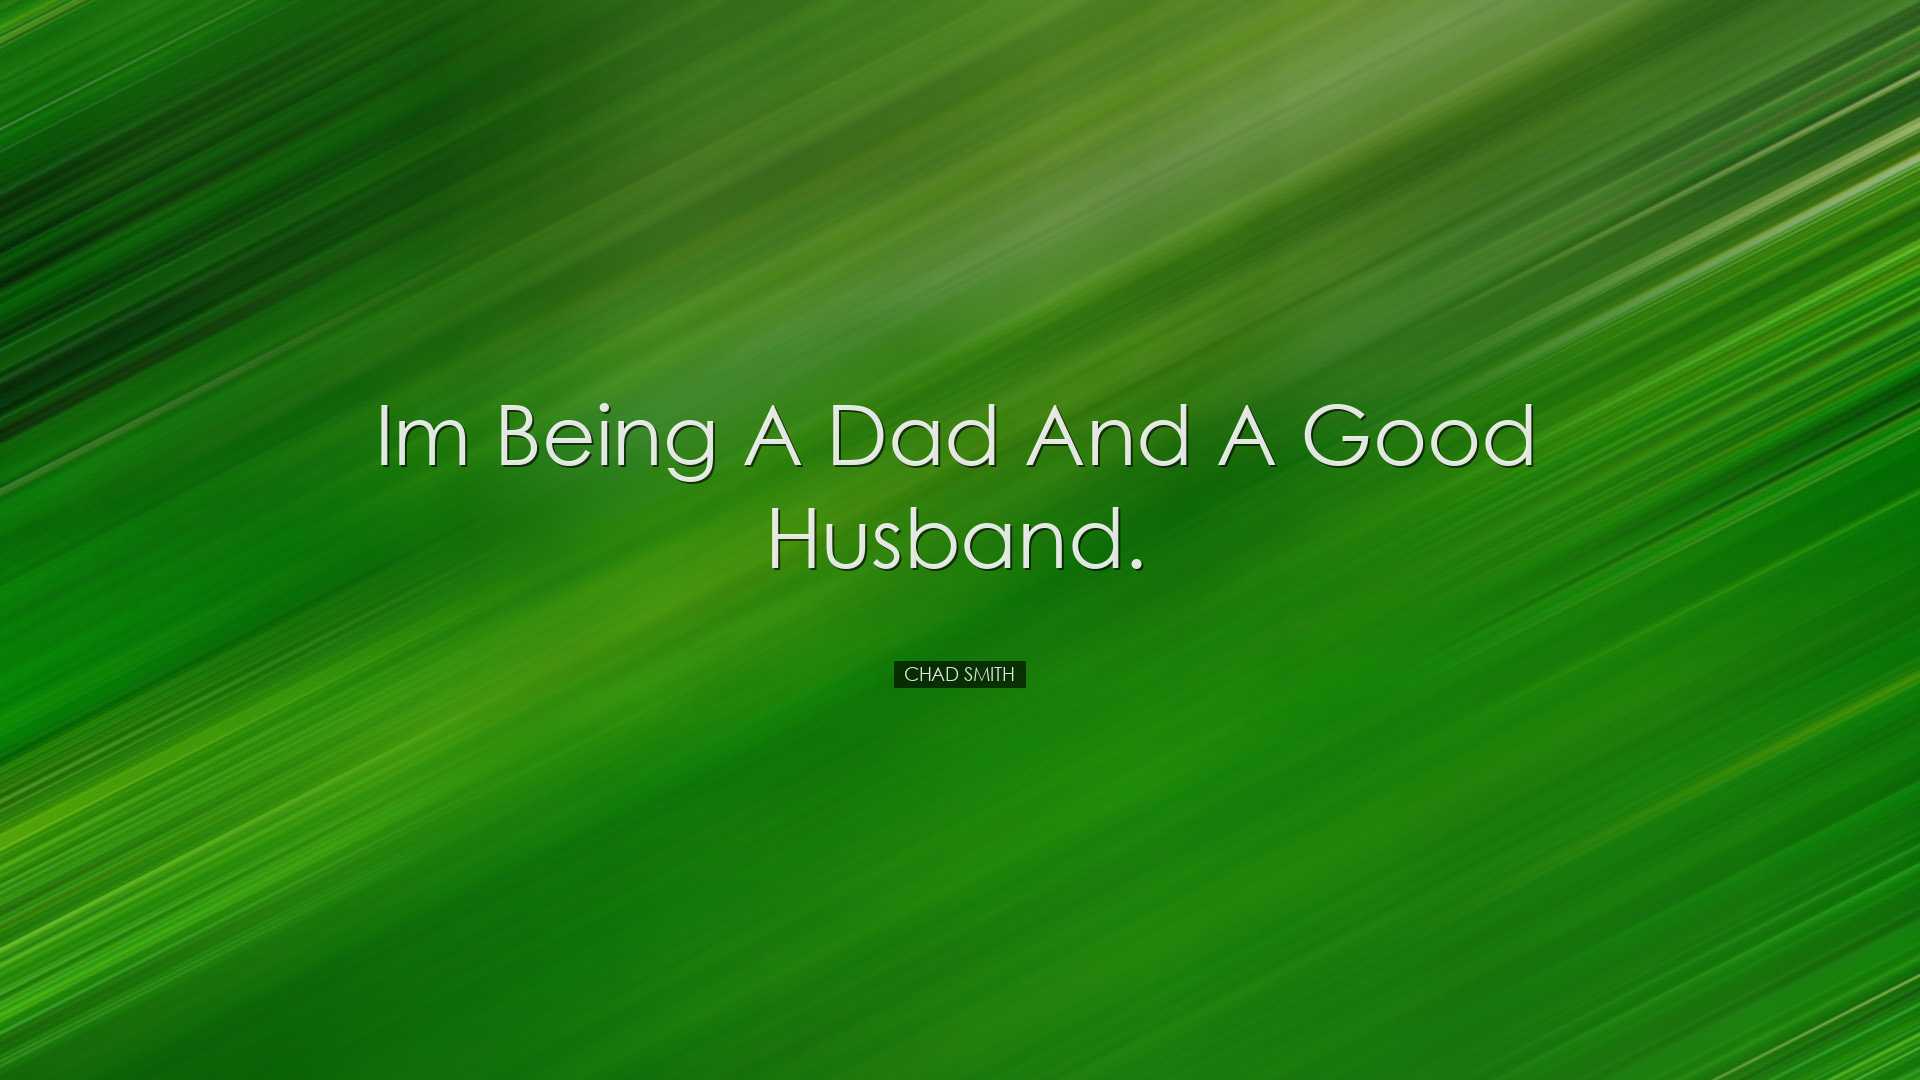 Im being a dad and a good husband. - Chad Smith